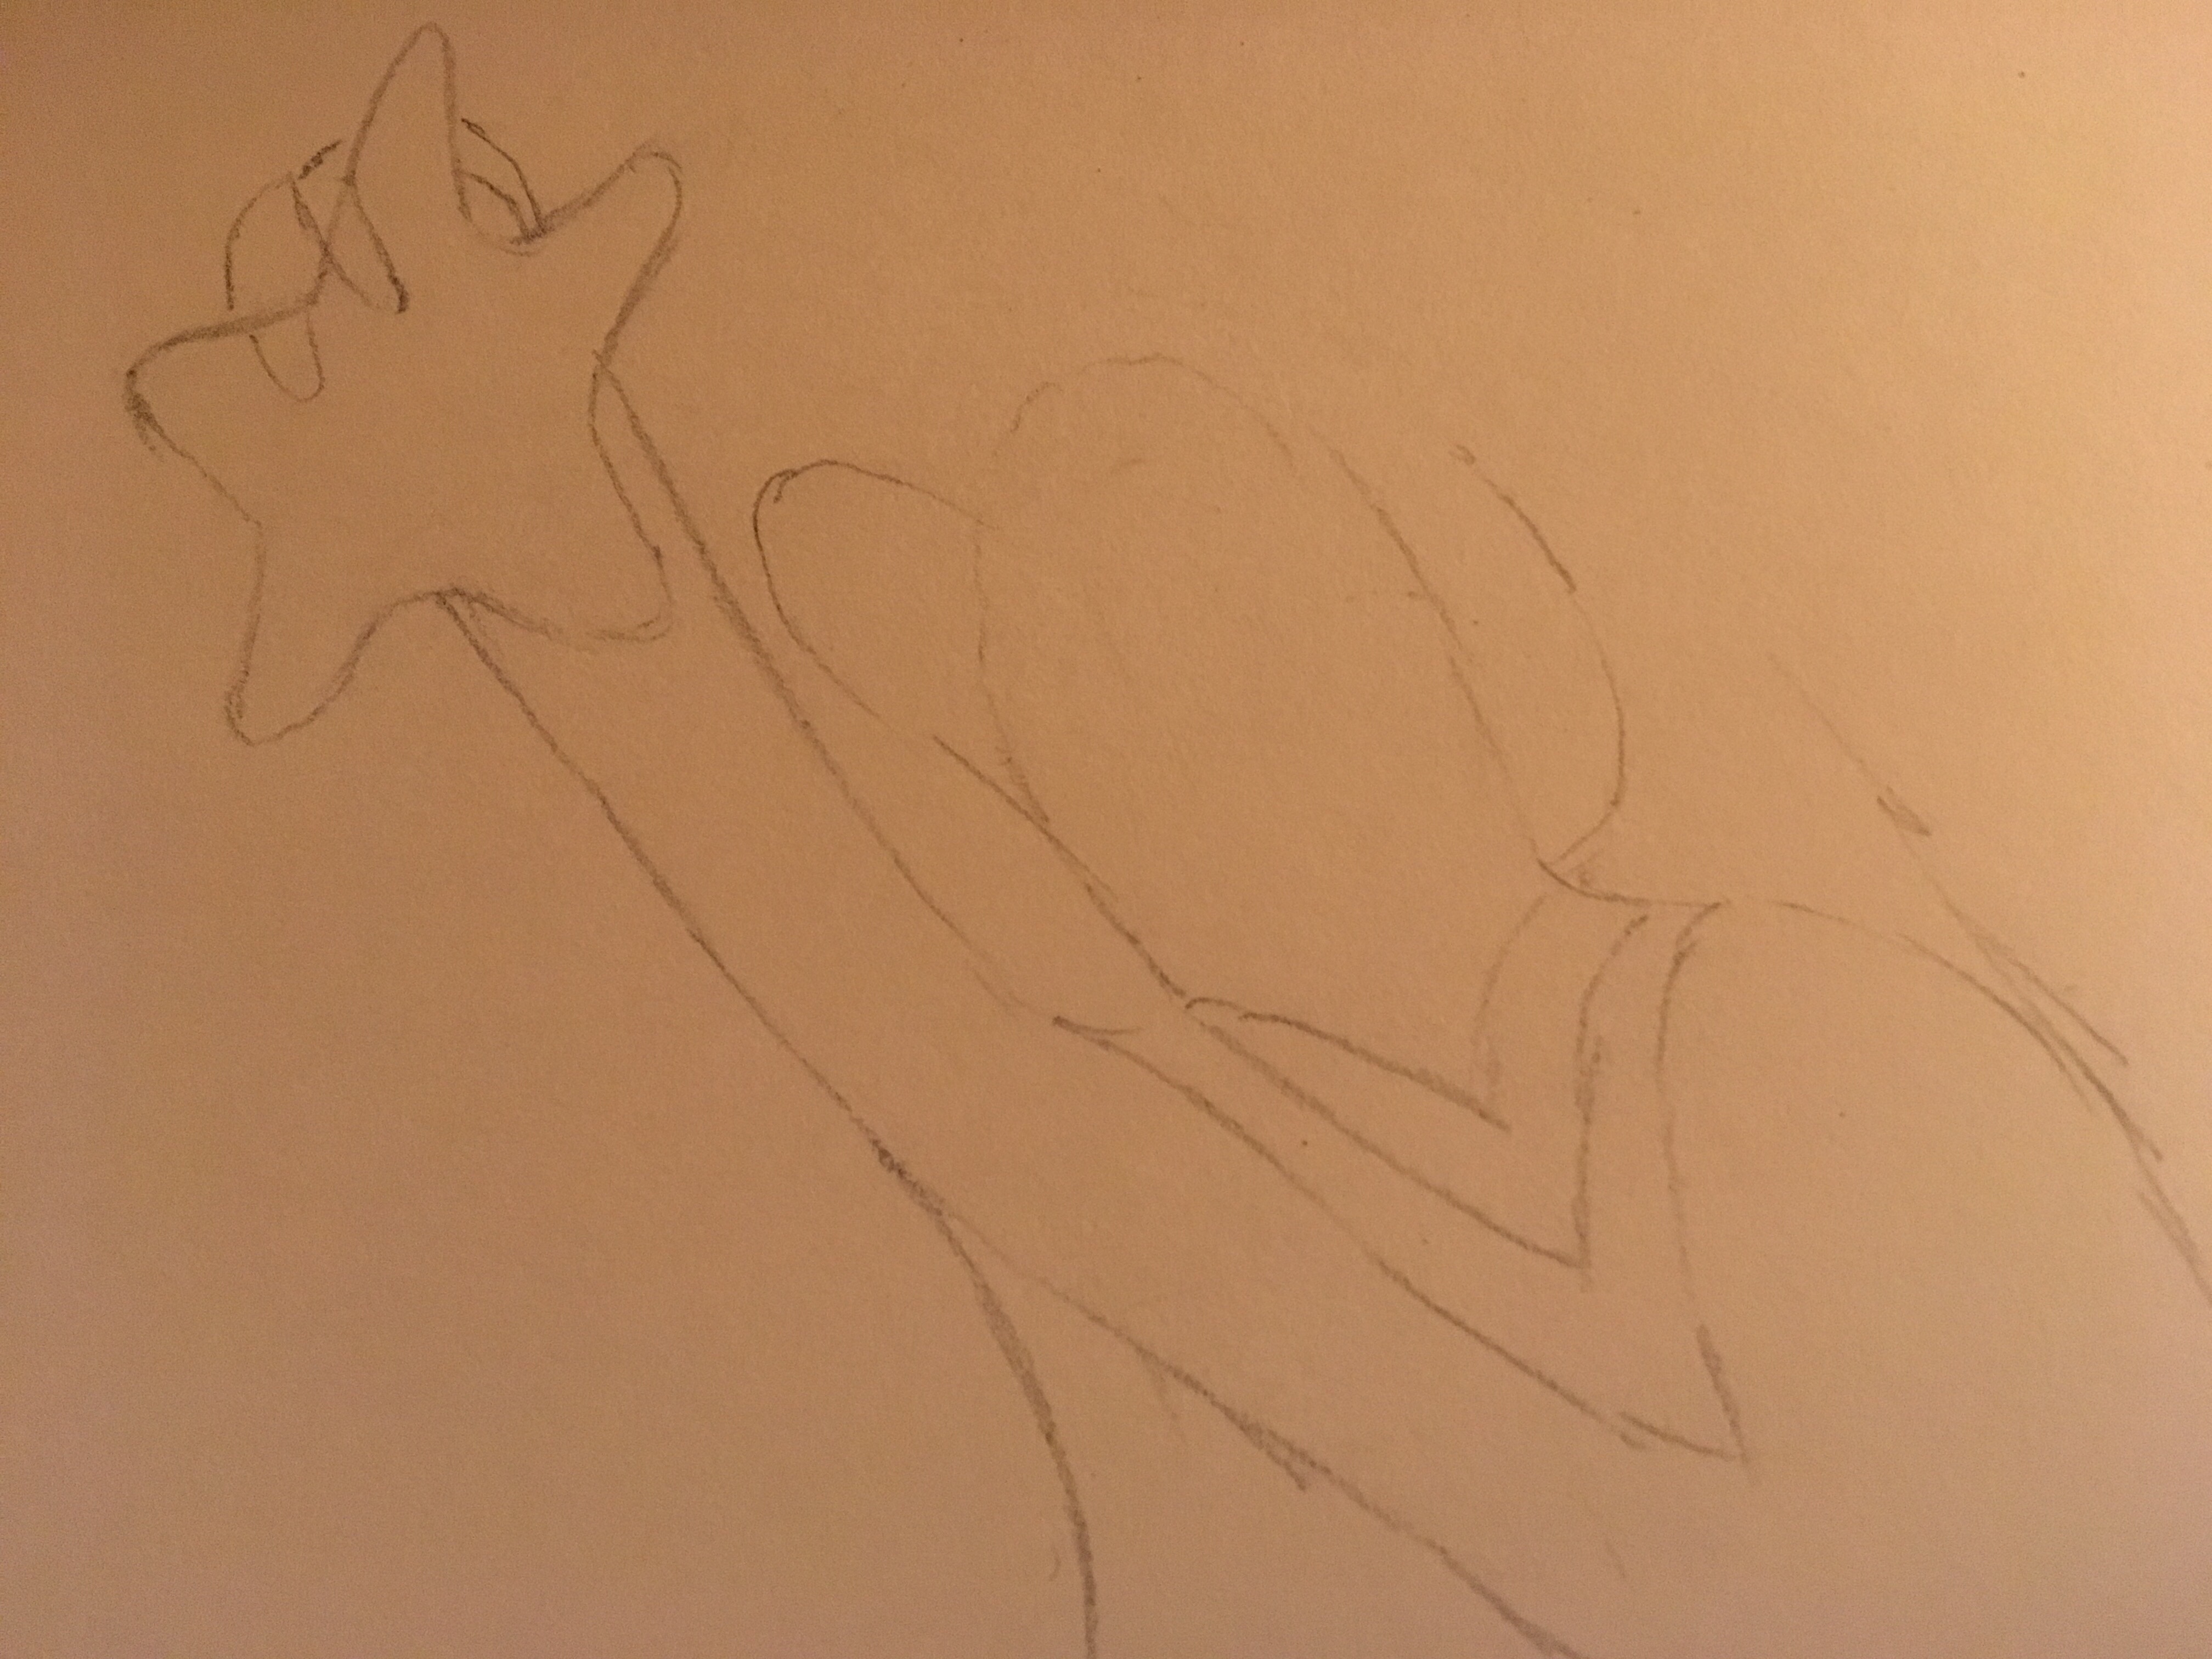 Sketch of dragon hand reaching for star